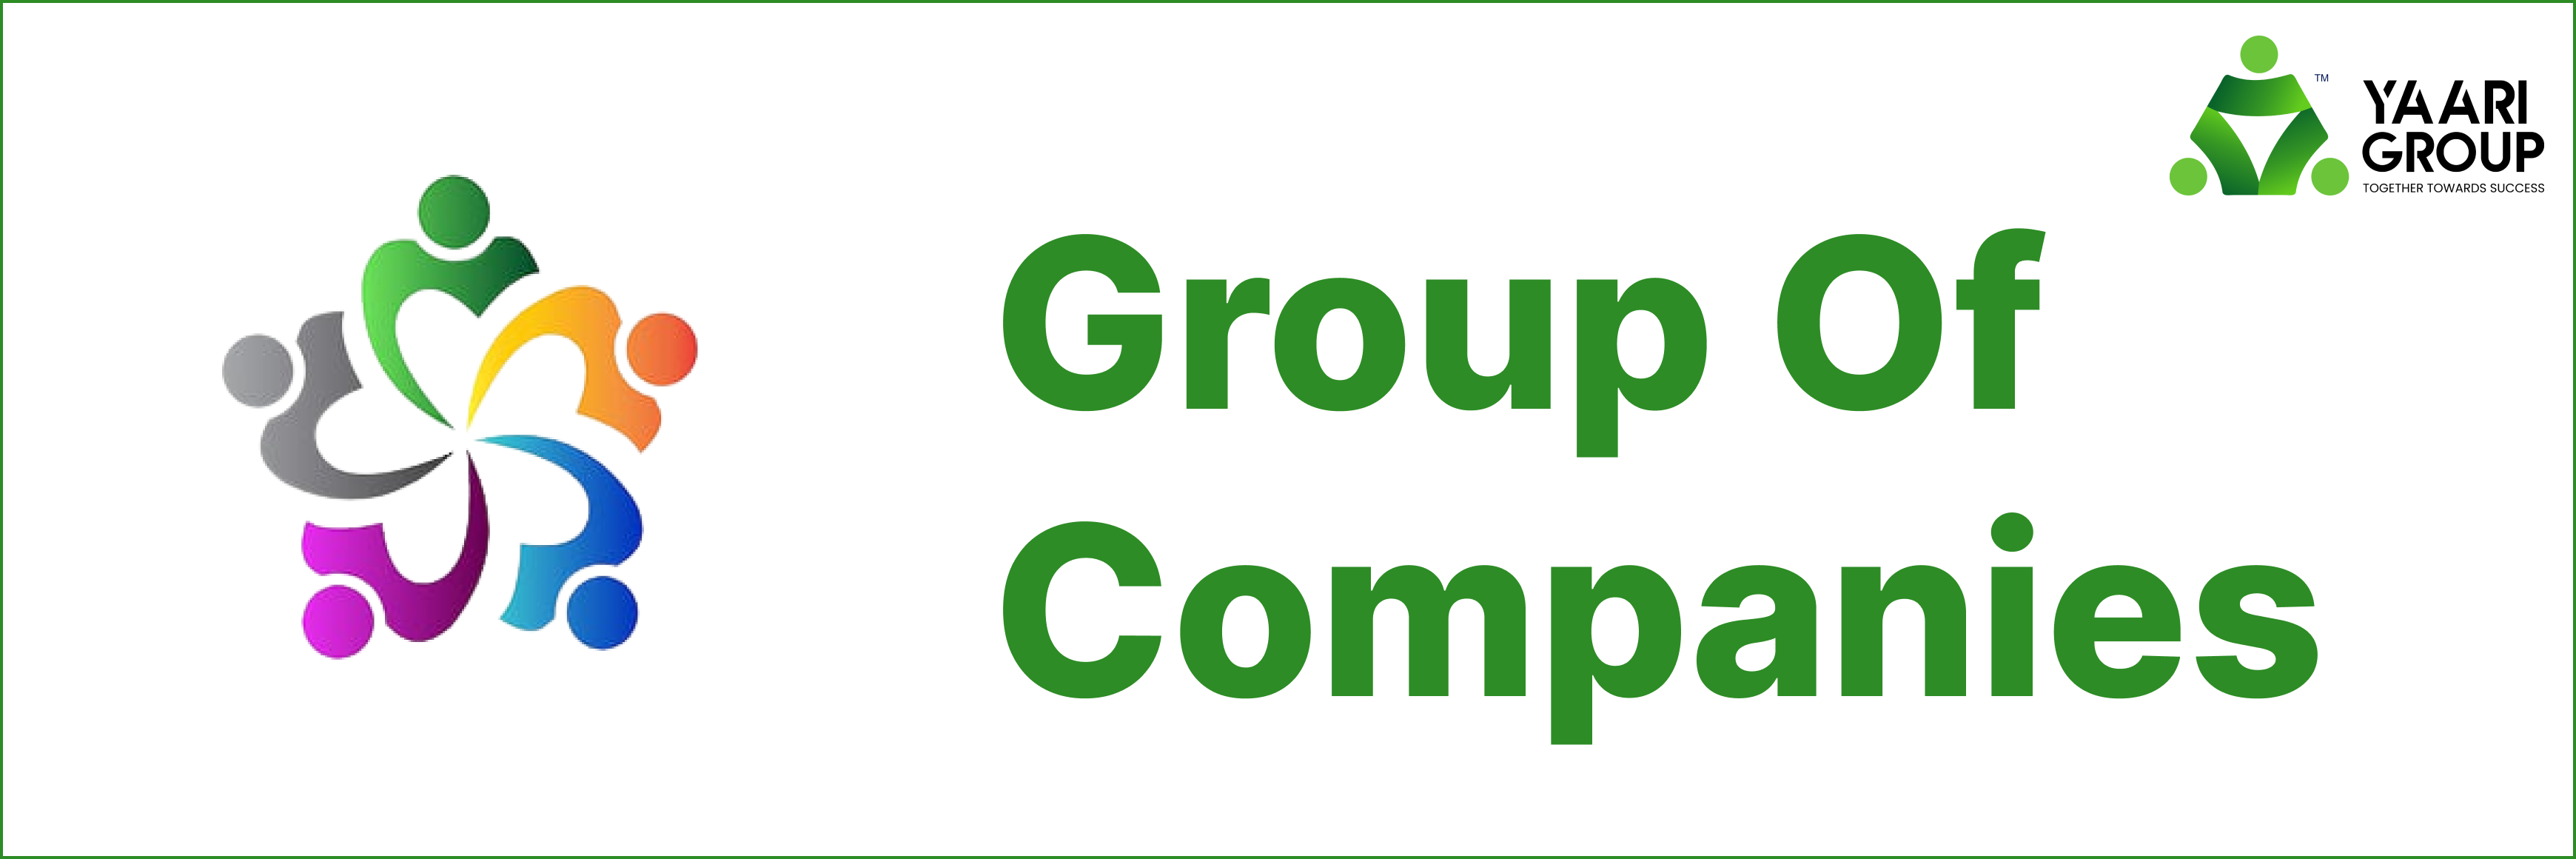 Why you should be Part Of Group Of Companies